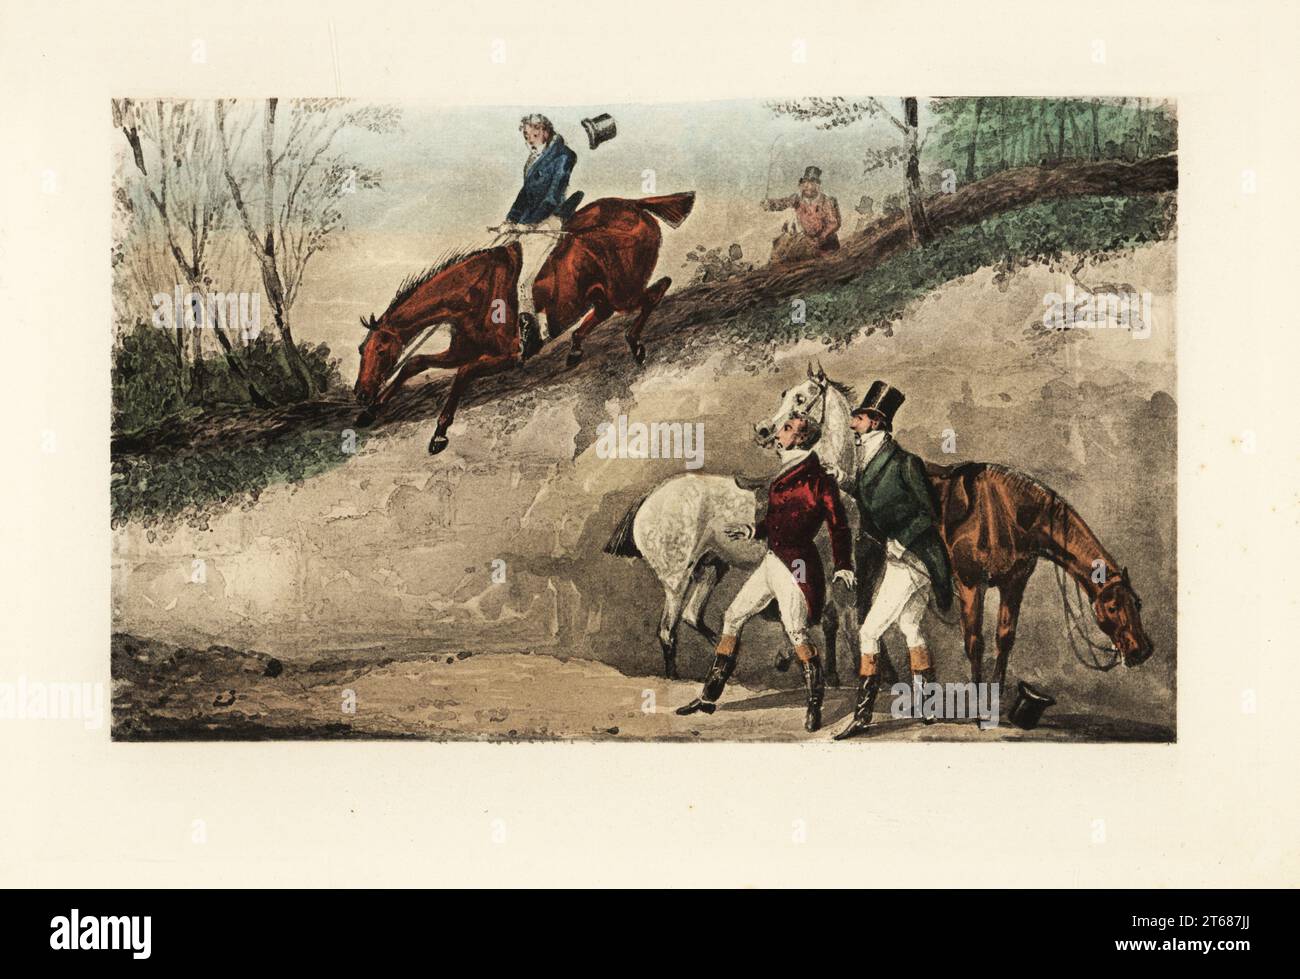 English gentleman on horseback making a jump from a steep embankment, 19th century. Other dandies watch from the ground. Mytton takes a drop as high as a house. Chromolithographic facsimile of an illustration by Henry Thomas Alken from Memoirs of the Life of the Late John Mytton by Nimrod aka Charles James Apperley, Kegan Paul, London, 1900. Stock Photo